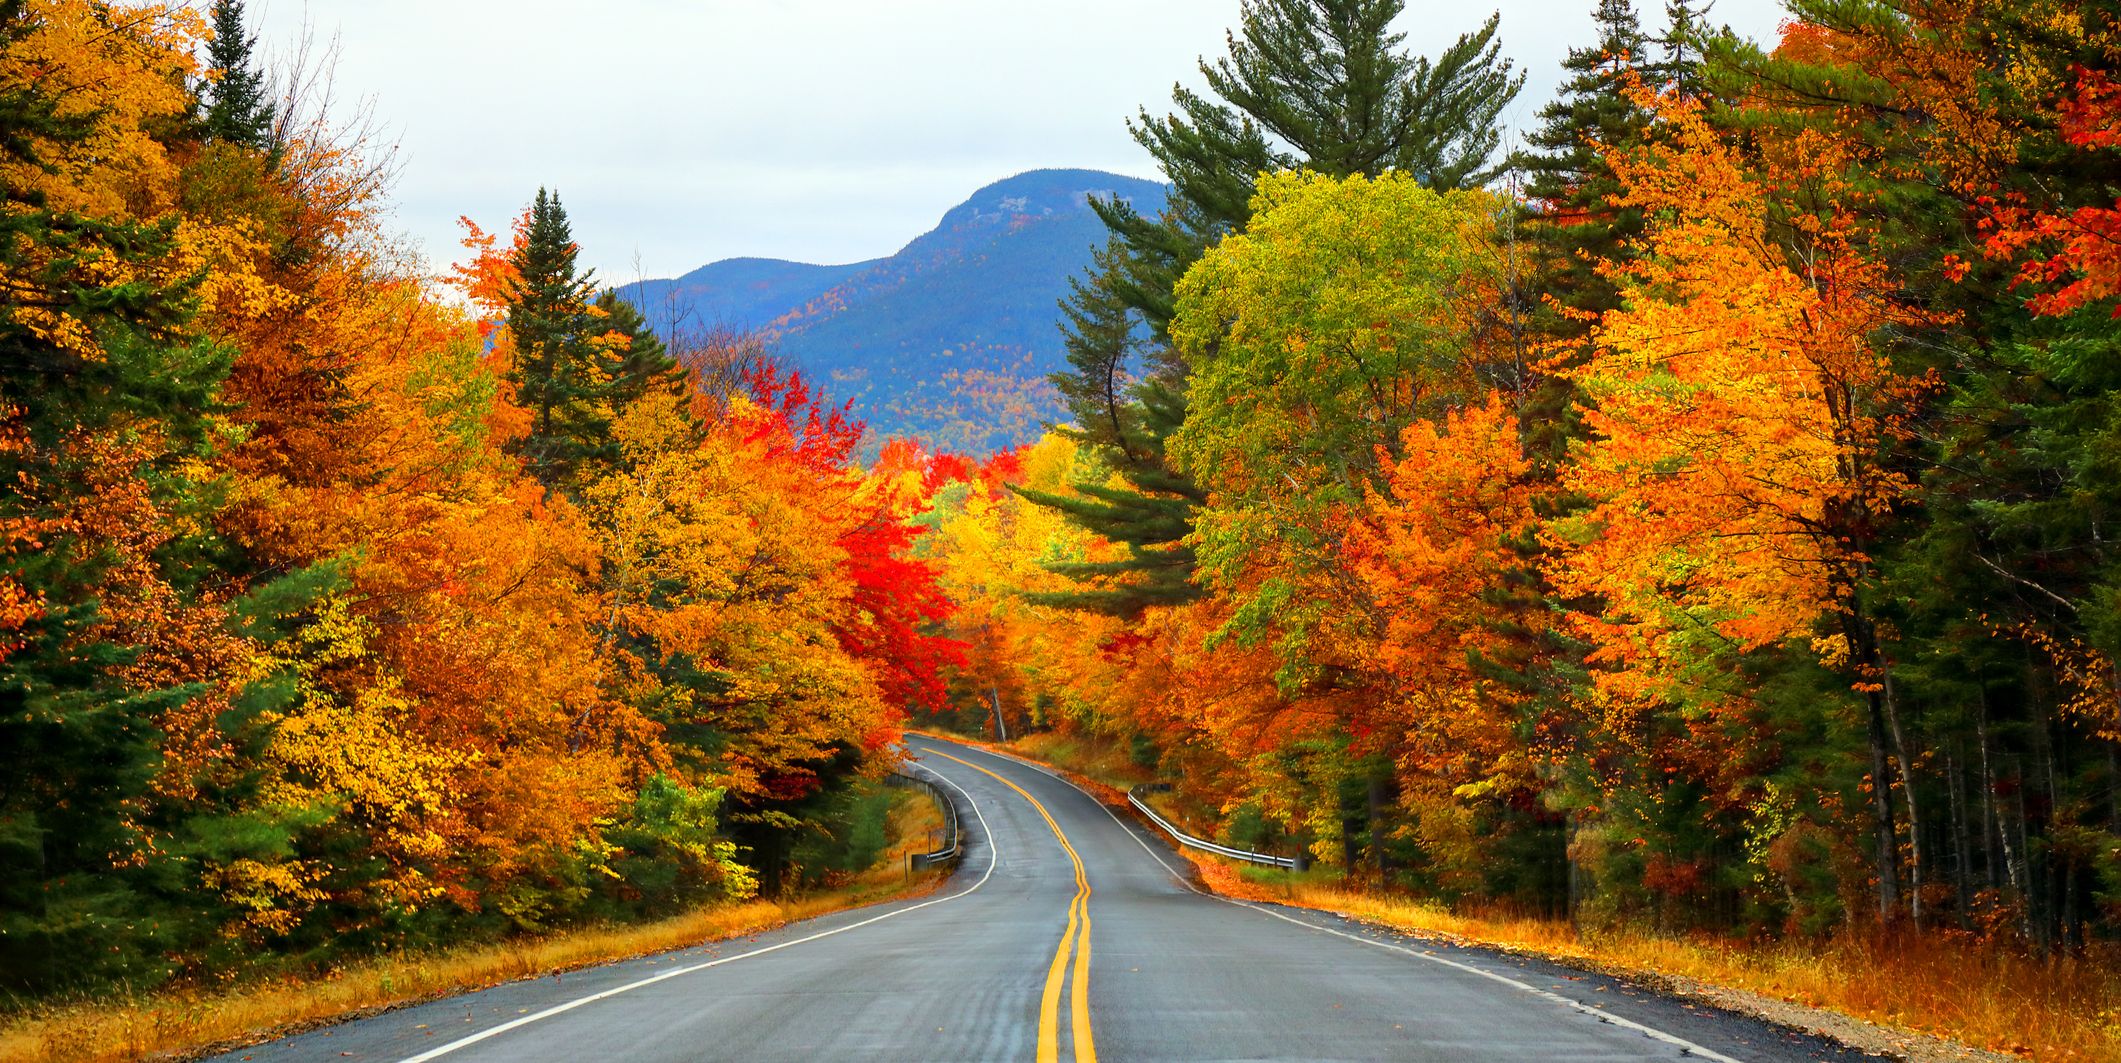 30 Beautiful Fall Foliage Pictures Around the World - Photos of Autumn Leaves